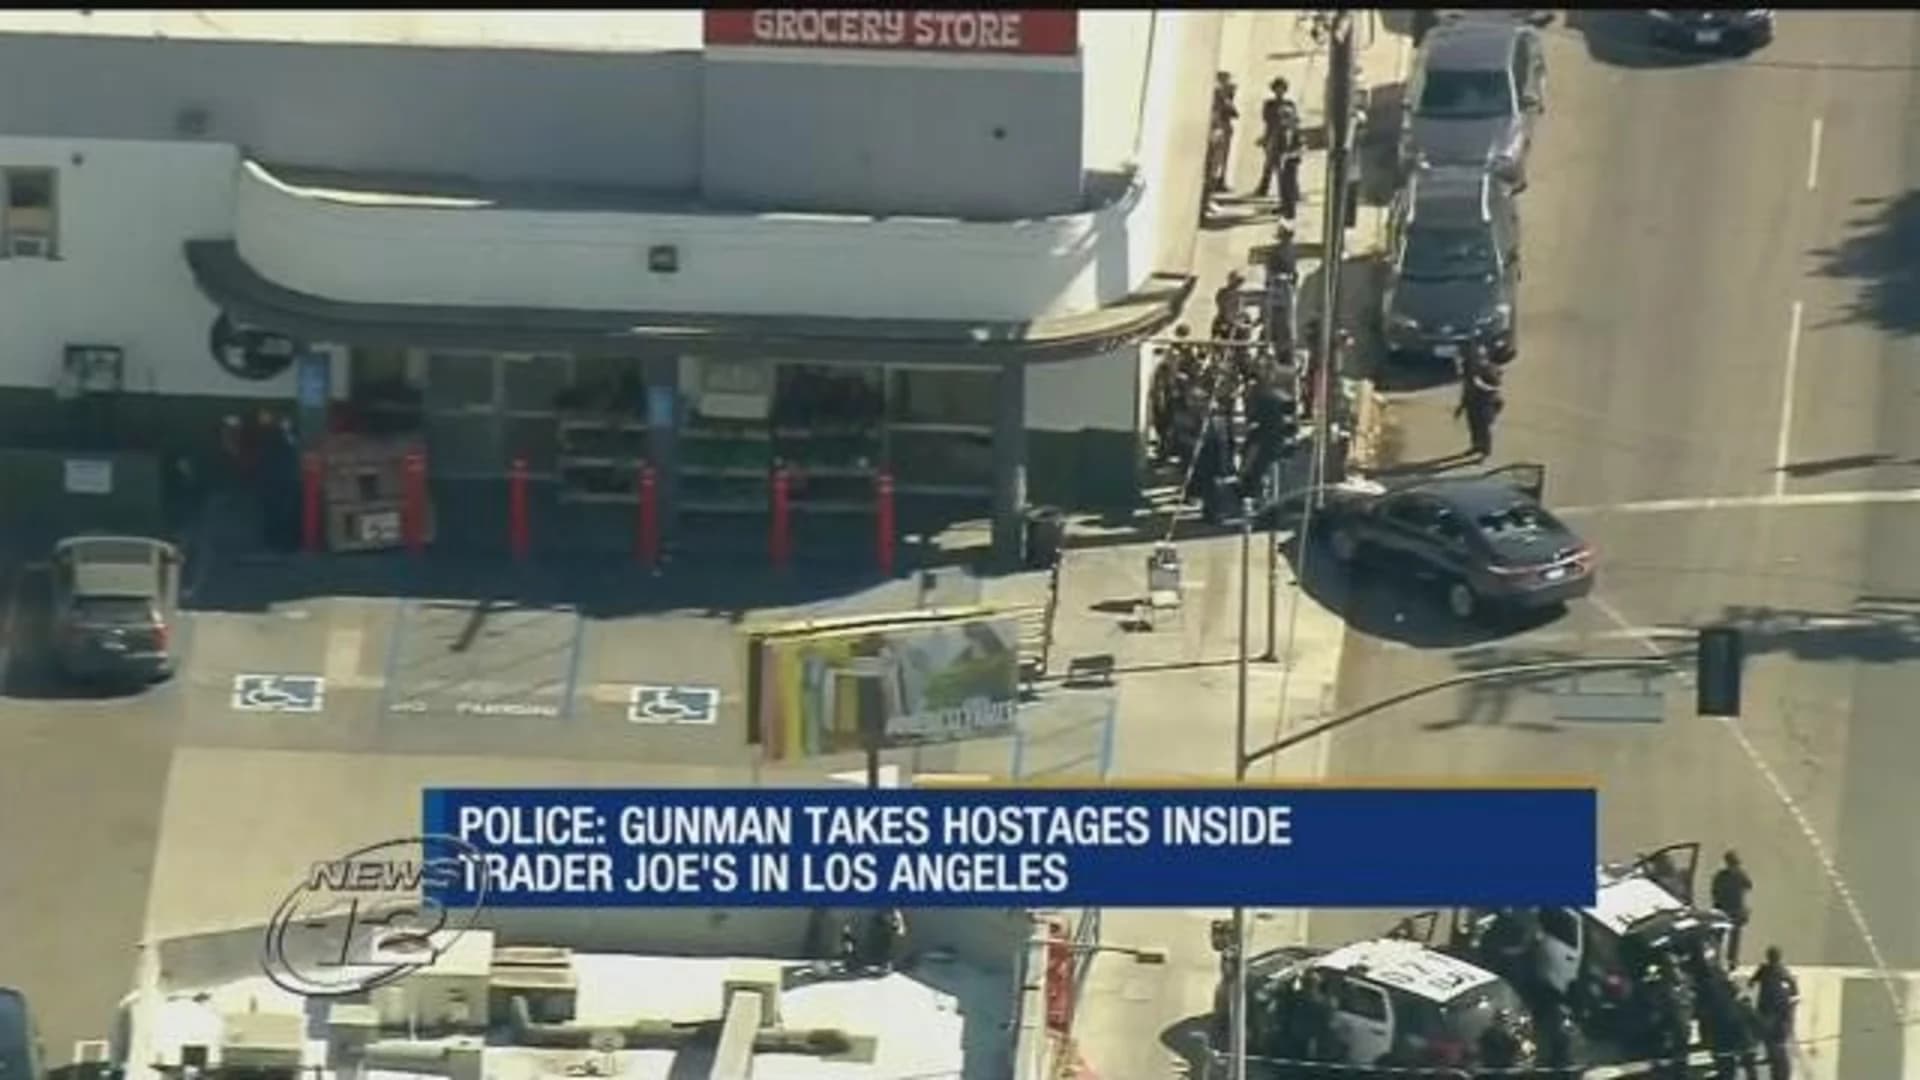 Shooting suspect in standoff at LA market; 1 woman killed